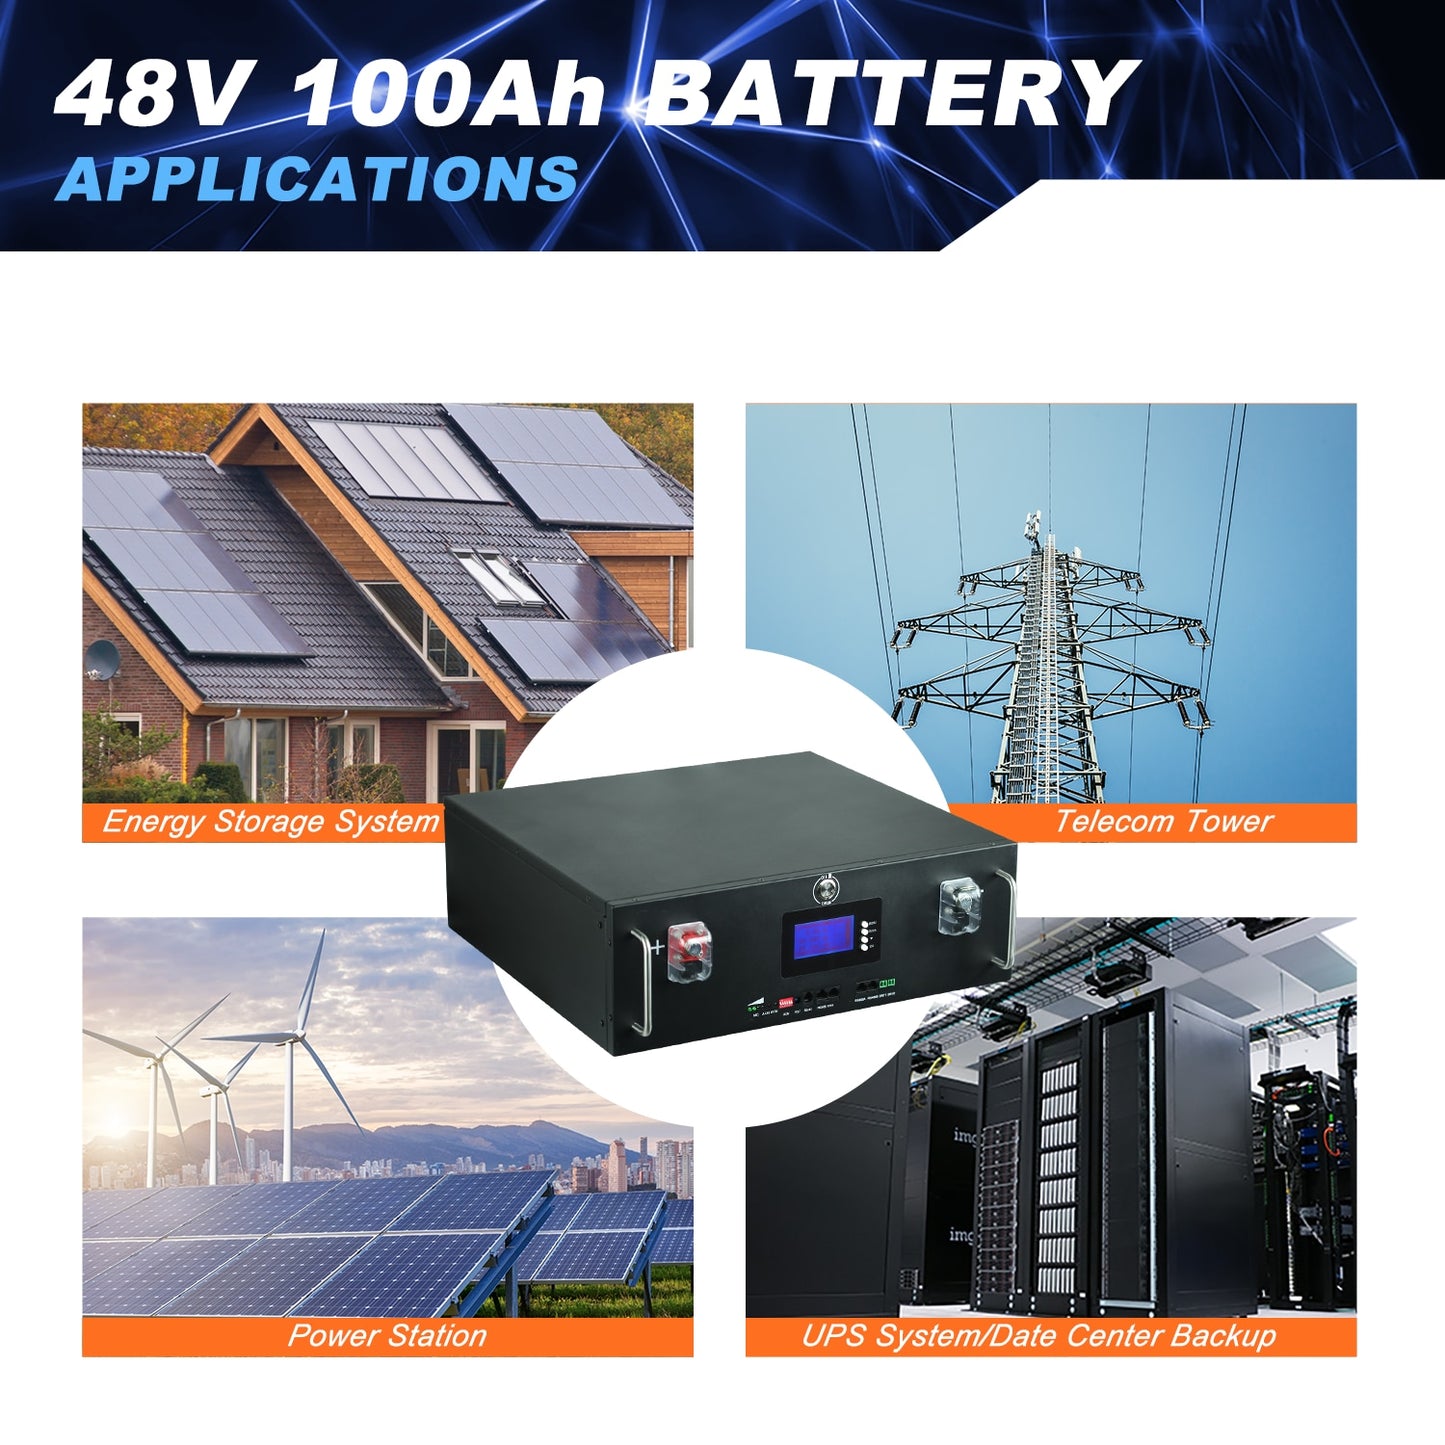 New 48V 100Ah LiFePo4 Battery Pack - 51.2V 5kw Lithium Iron Phosphate Batteries 16S 100A Built-in BMS 48V Pack For Solar No Tax